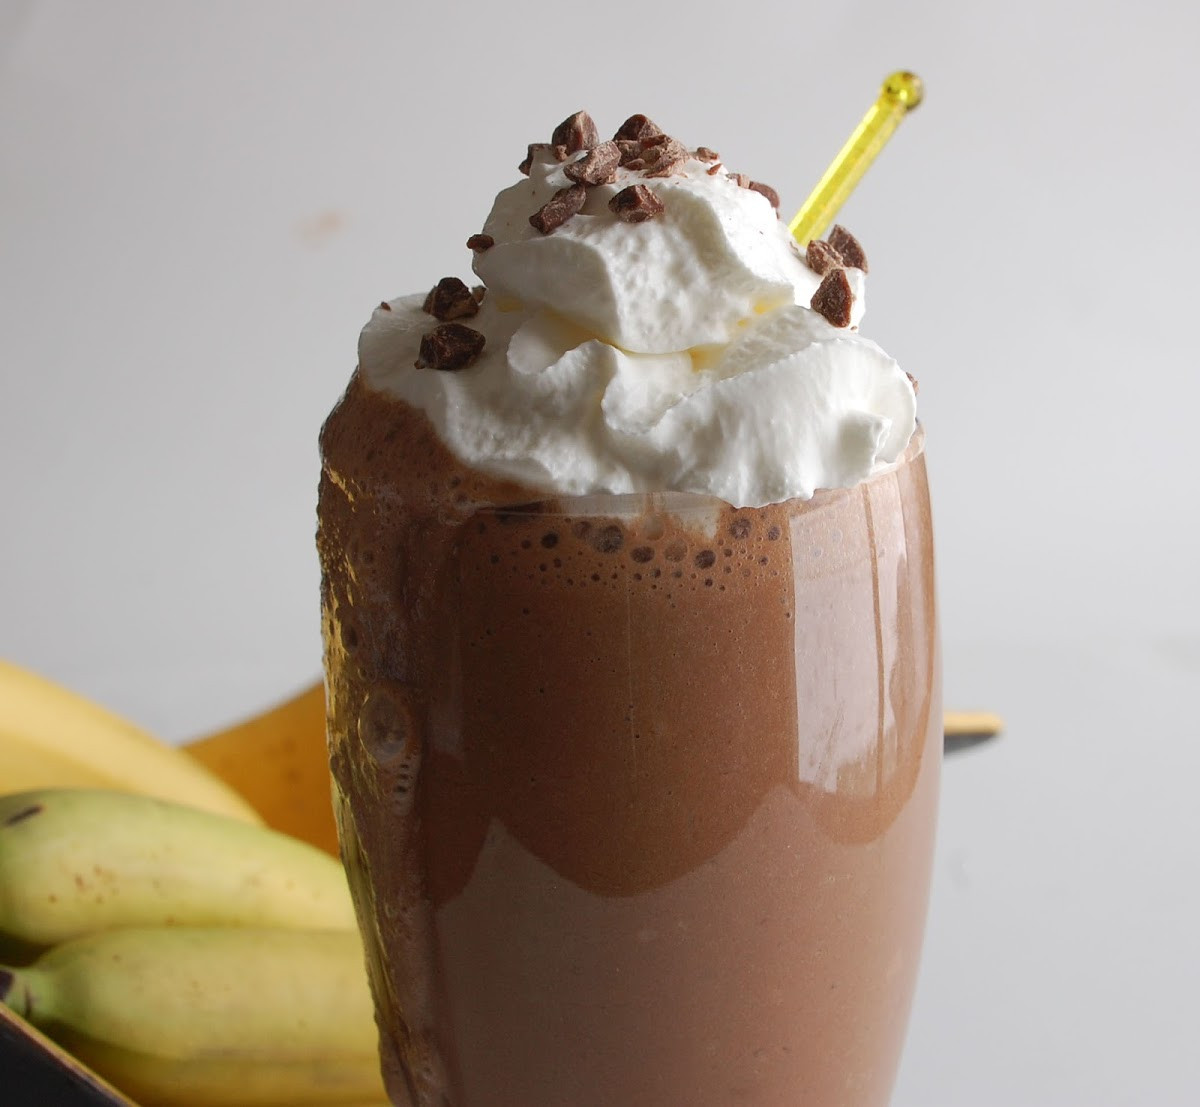 Chocolate Smoothies For Kids
 10 Best Sugar Free Chocolate Smoothies Recipes